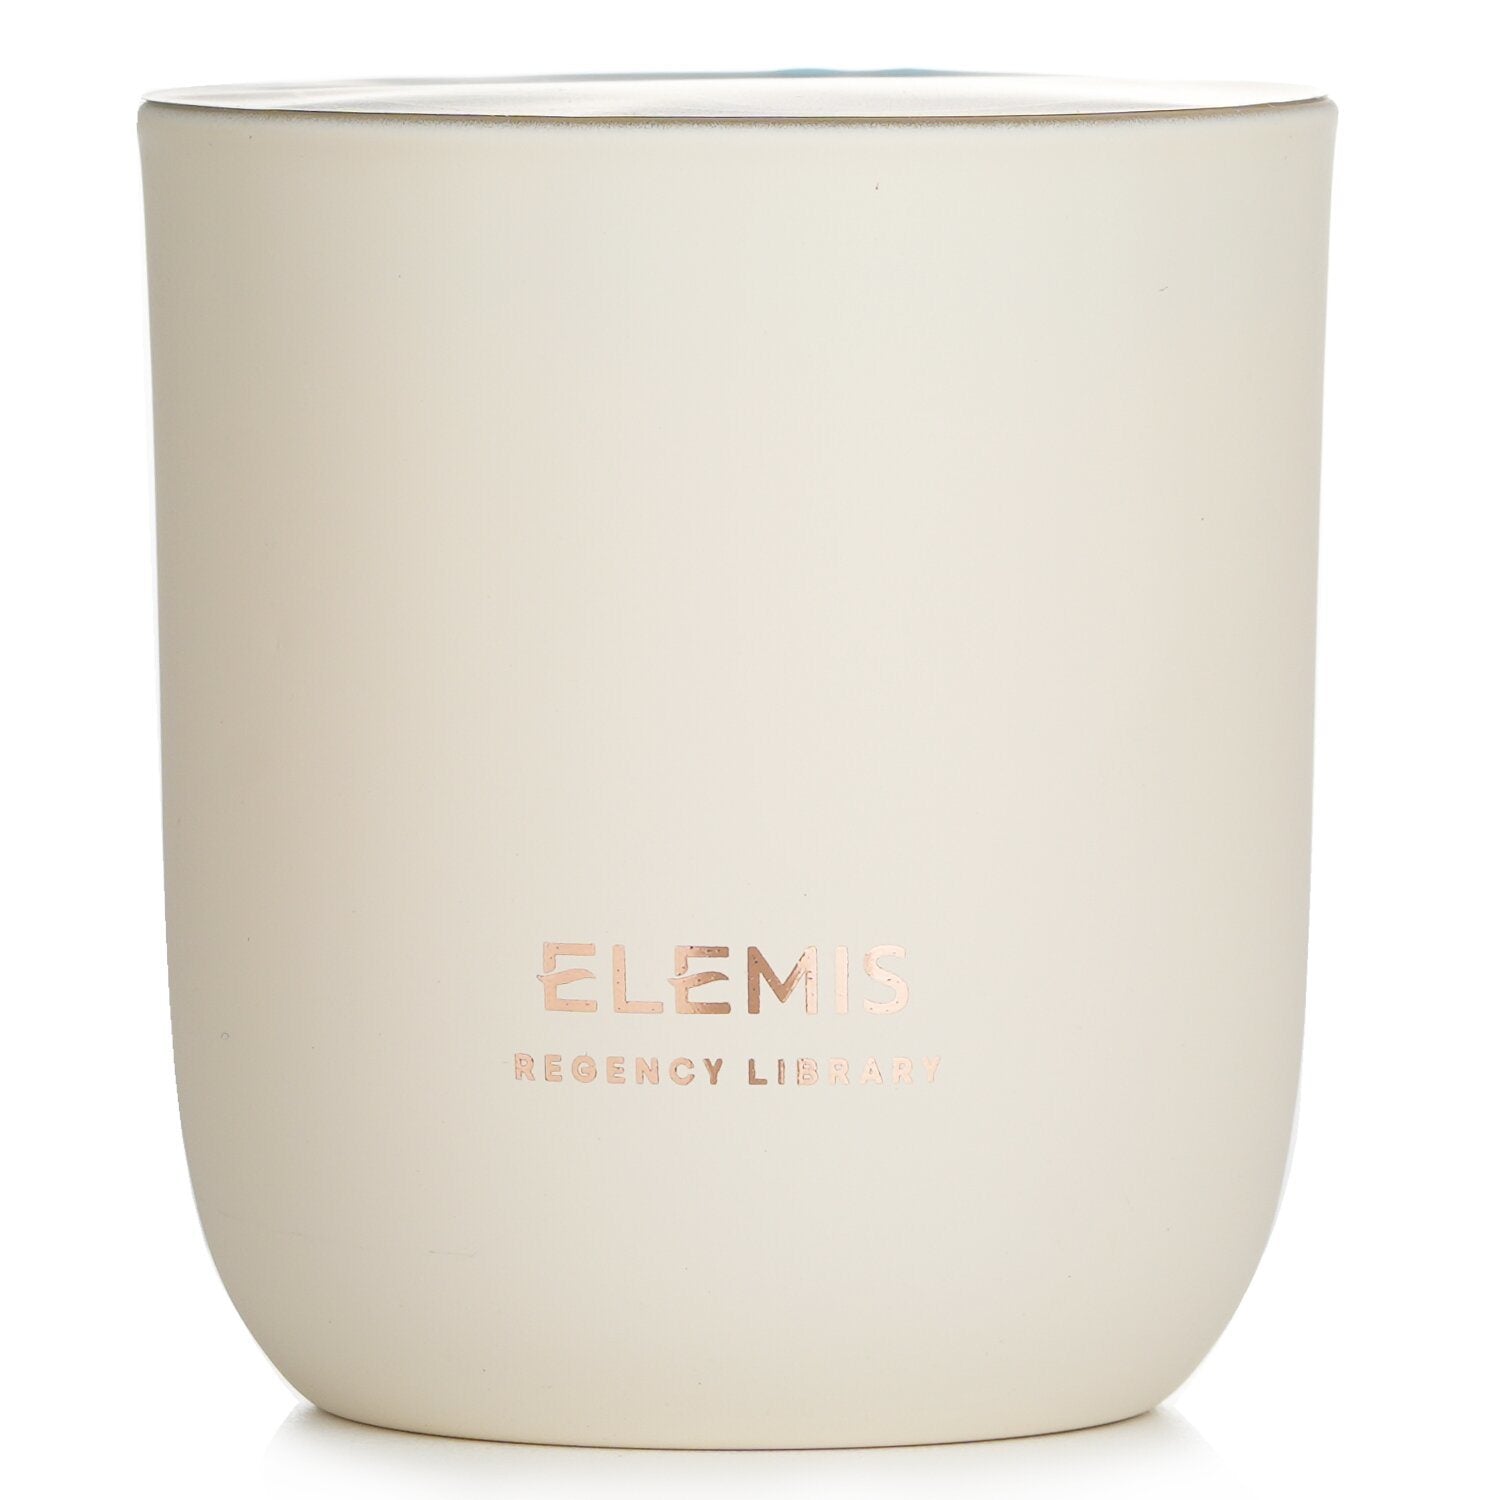 A white ELEMIS - Scented Candle - Regency Library 888924 220g/7.05oz with the words elemis on it, featuring a pleasant fragrance.